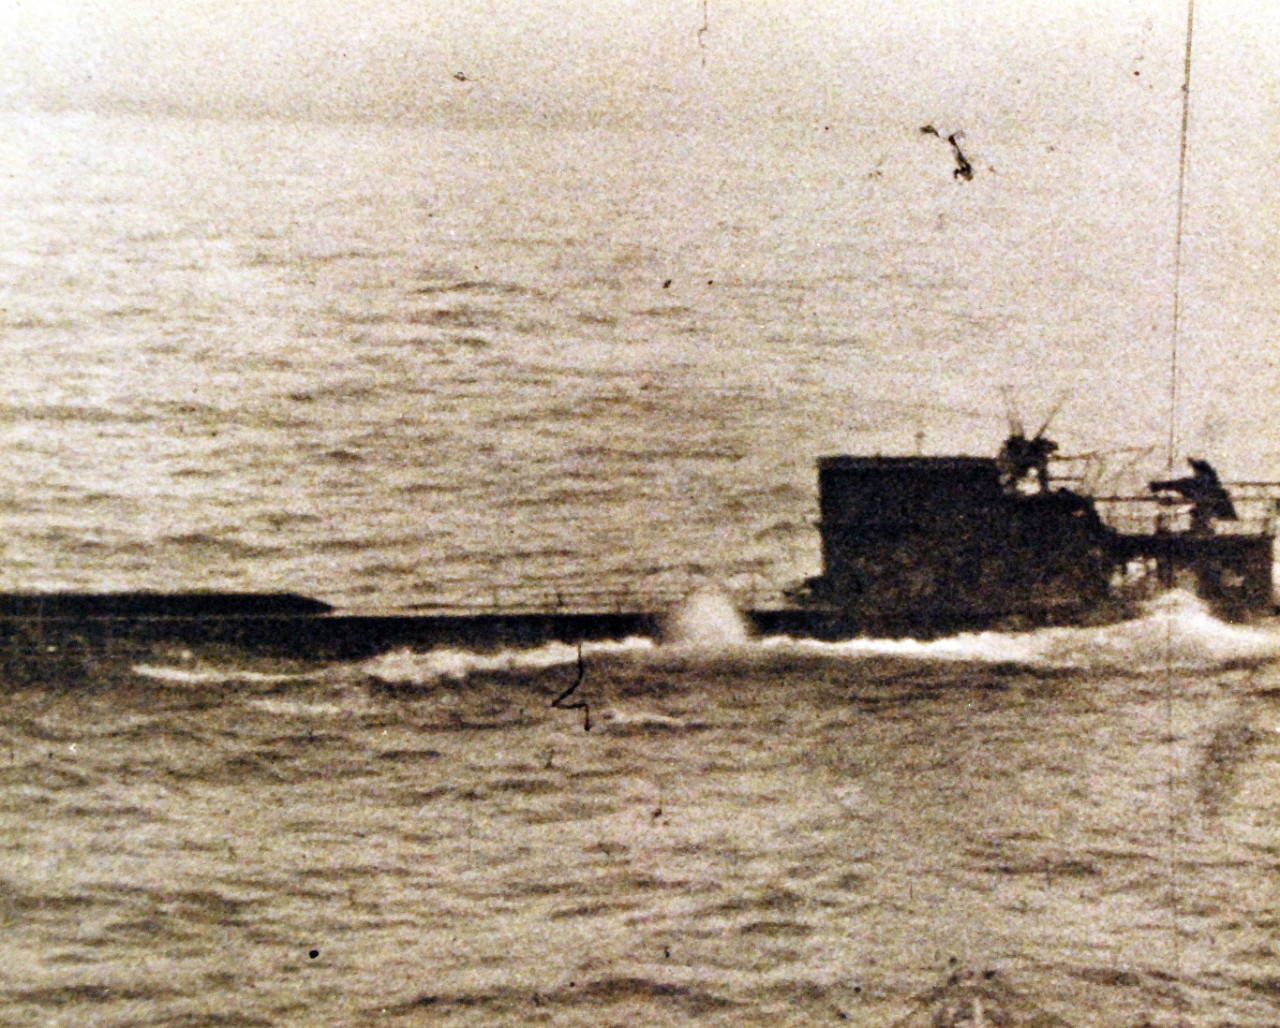 <p>80-G-700006: Battle of the Atlantic. U-233 (German Type XB Submarine) about to be rammed by USS Thomas (DE 102) in the North Atlantic, 5 July 1944. Photographed from Thomas’ bridge, as she approaches to ram the submarine amidships. Note “hump” of mine chutes on U-233’s foredeck, a feature of the type XB boats.&nbsp;</p>
